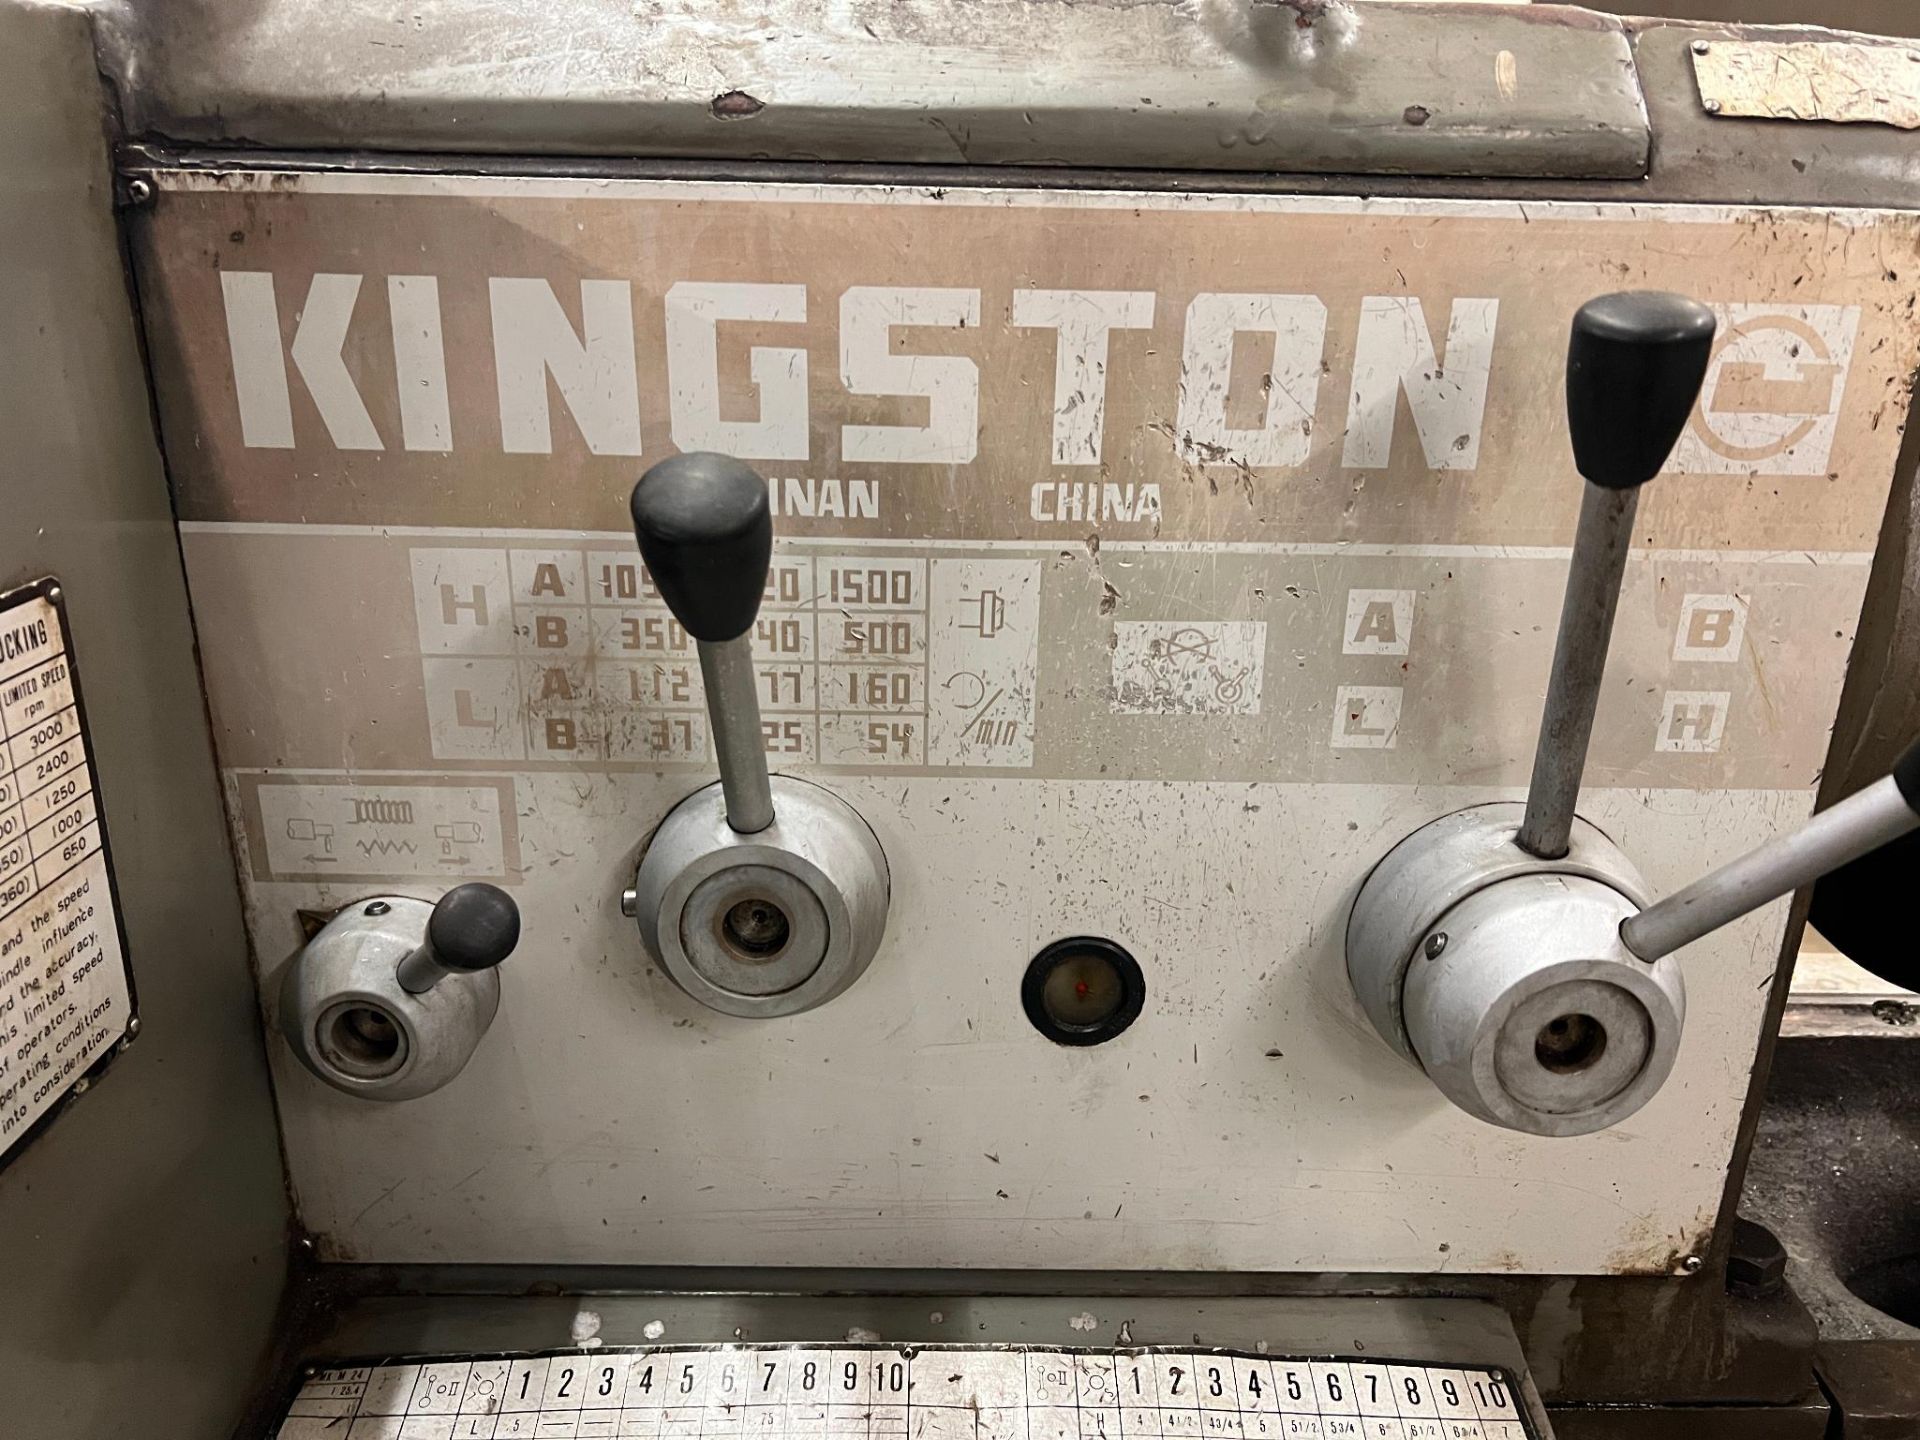 Kingston HLC-2180 (JIMK530x2000) Gap Bed Engine lathe Serial Number K3099715. 21" x 80" Swing over b - Image 15 of 21